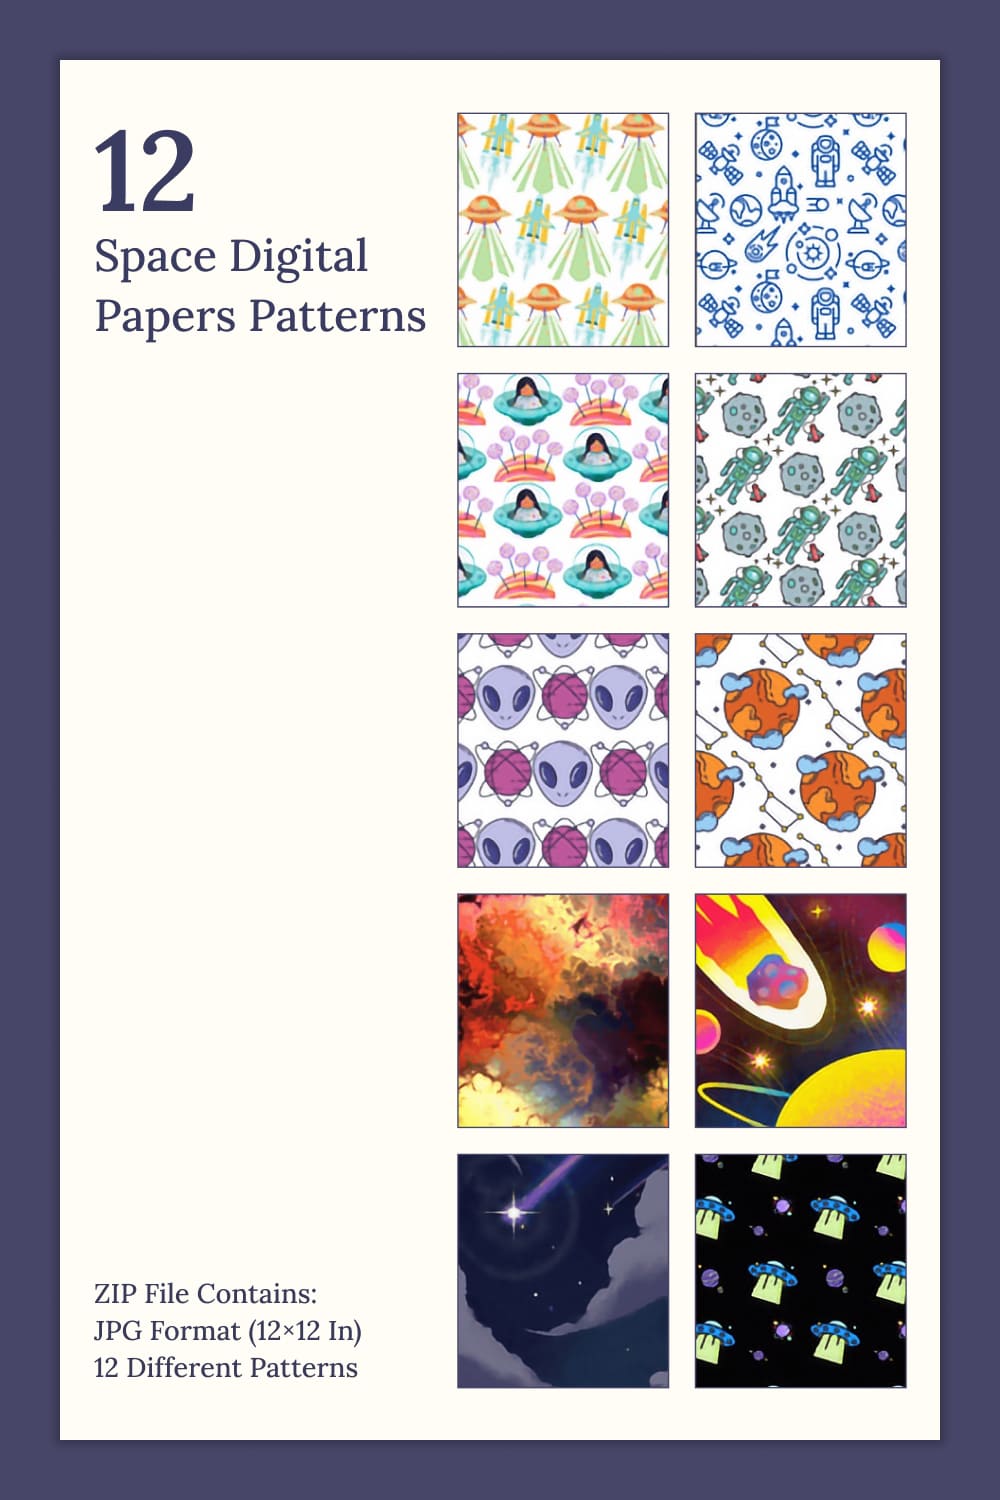 Colorful images of space on paper patterns.